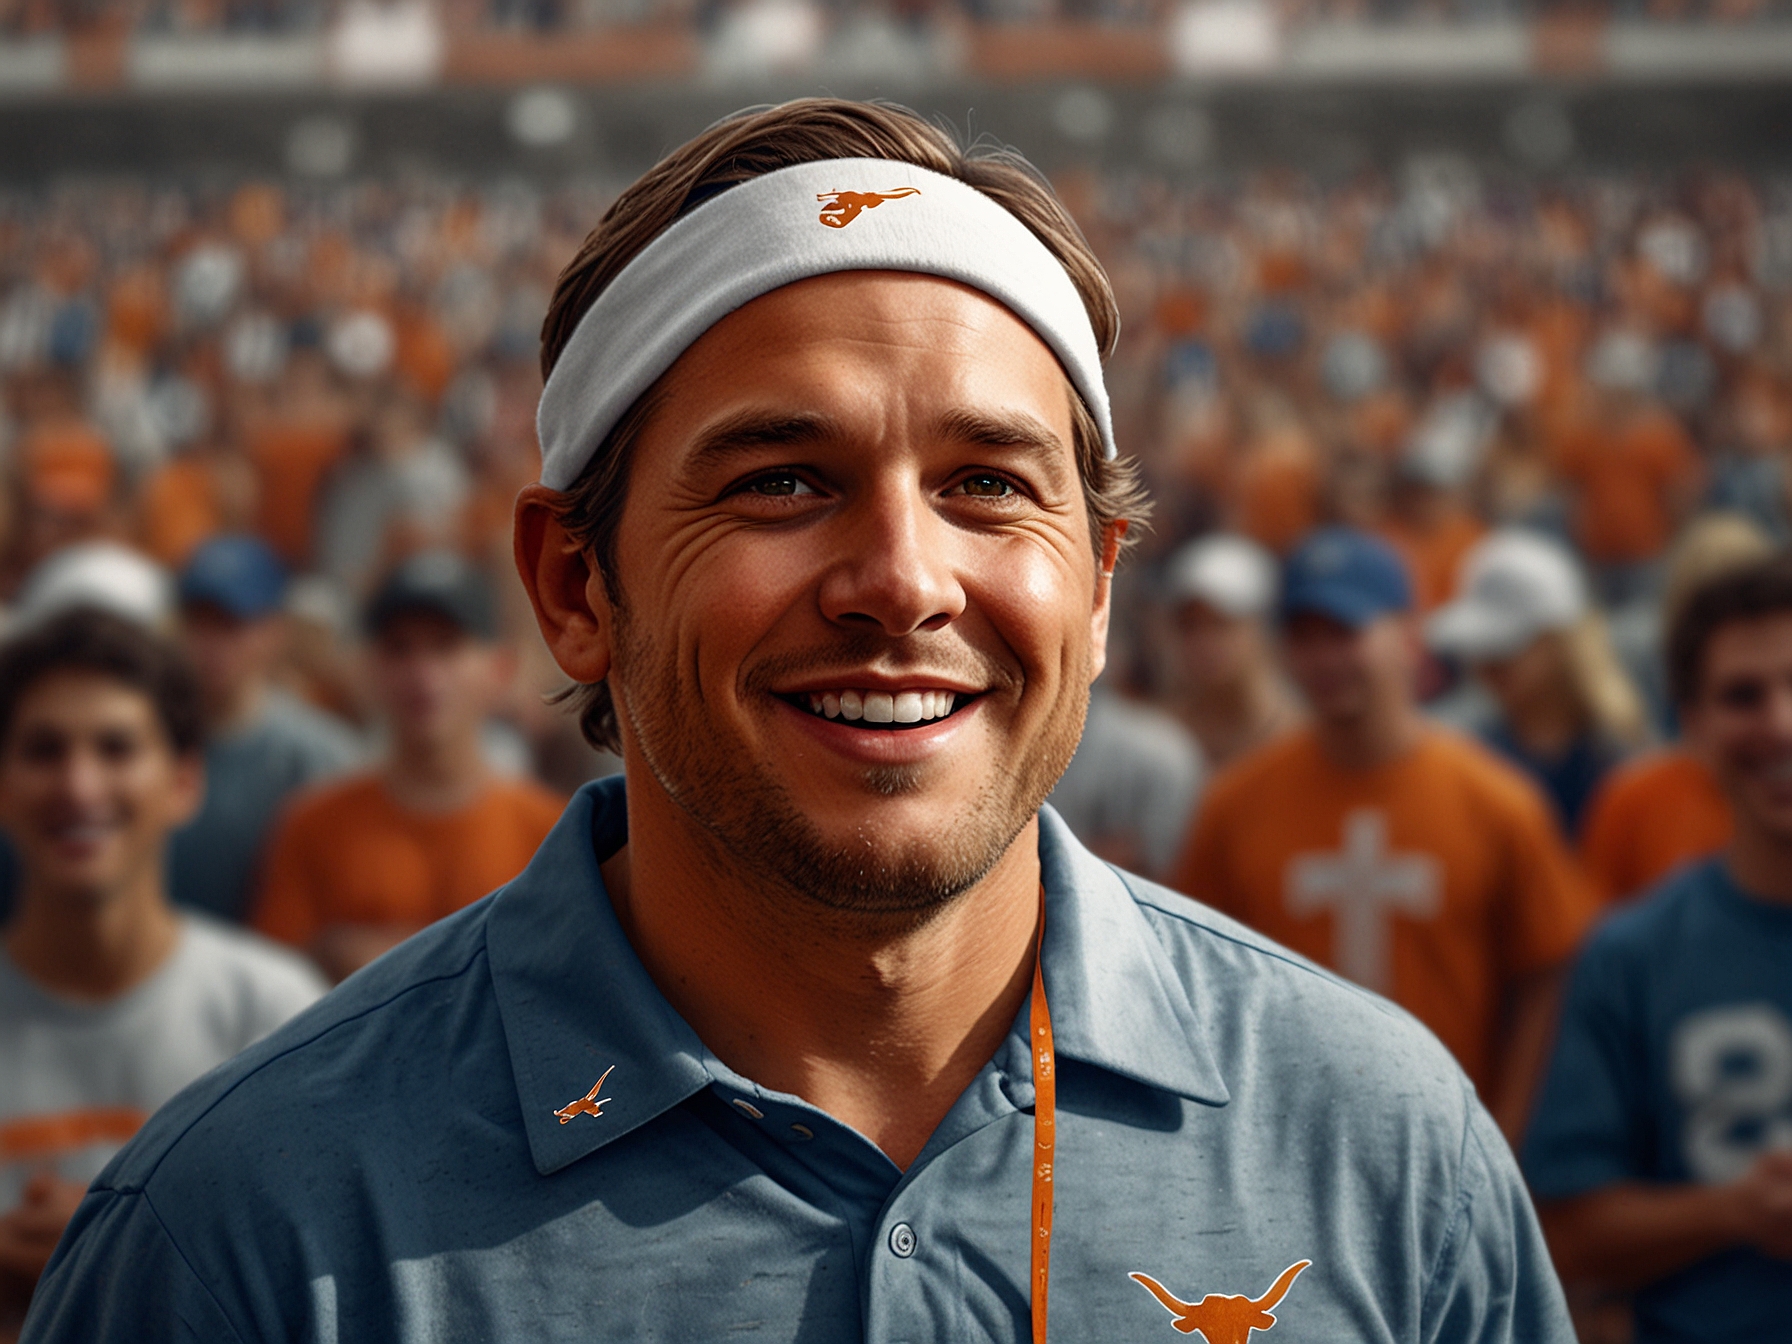 Illustration of a Texas Longhorns fan wearing team colors, highlighting the excitement and anticipation among supporters for new rivalries and high-stakes games in the SEC.